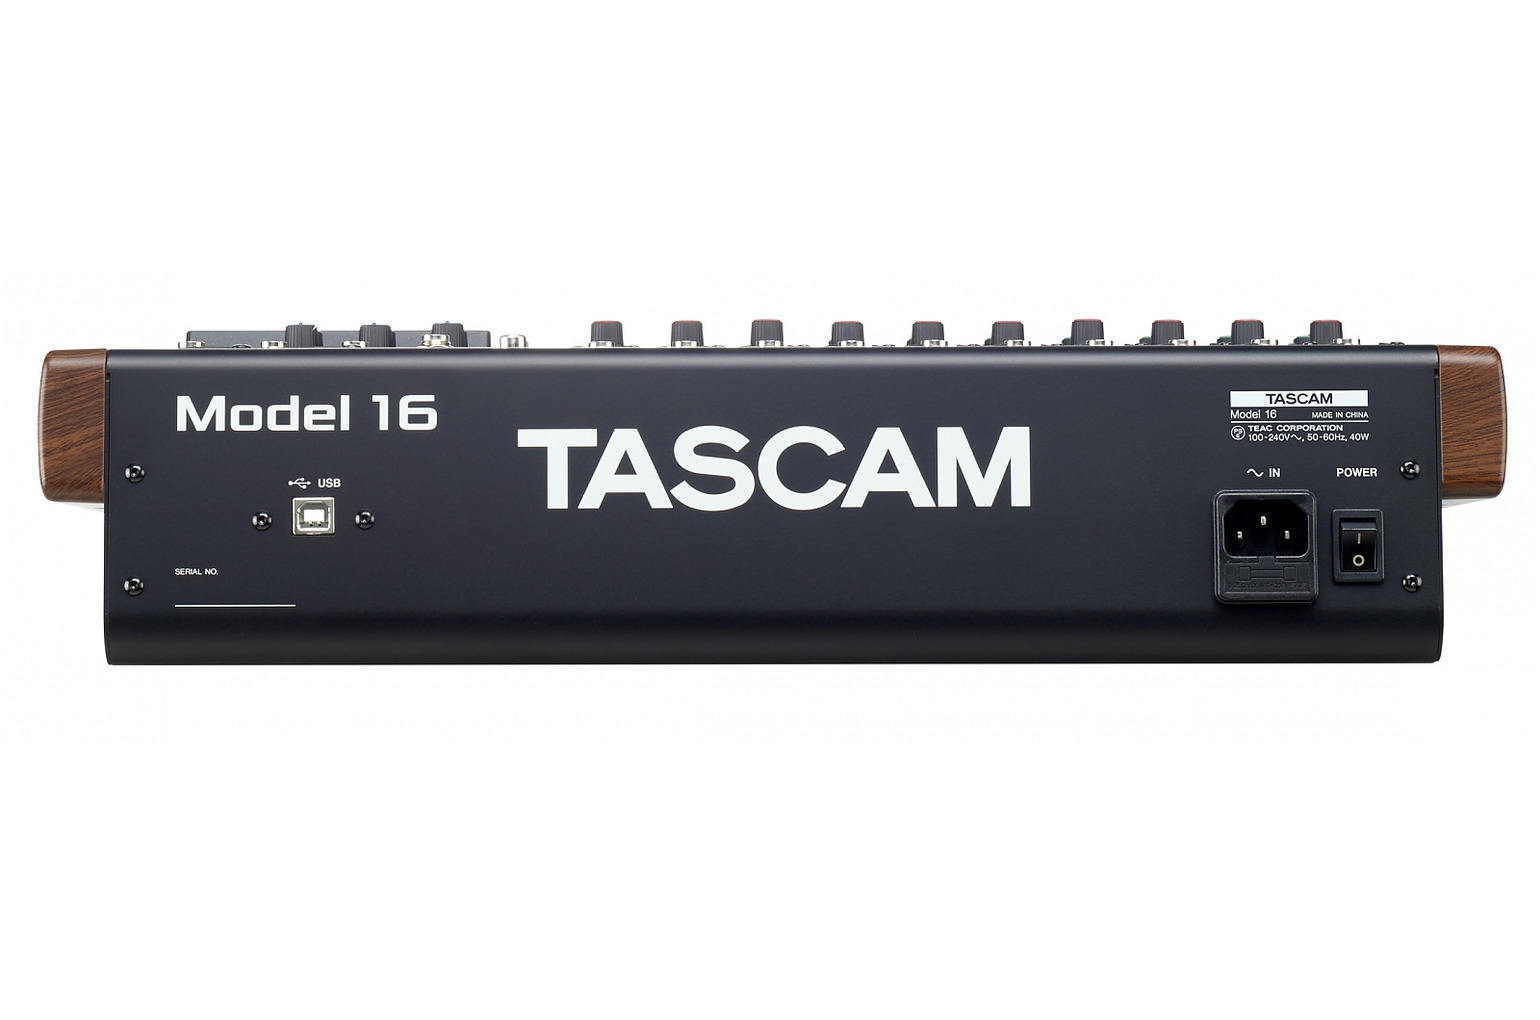 TASCAM Model 16 14-Channel Analogue Mixer With 16-Track Digital